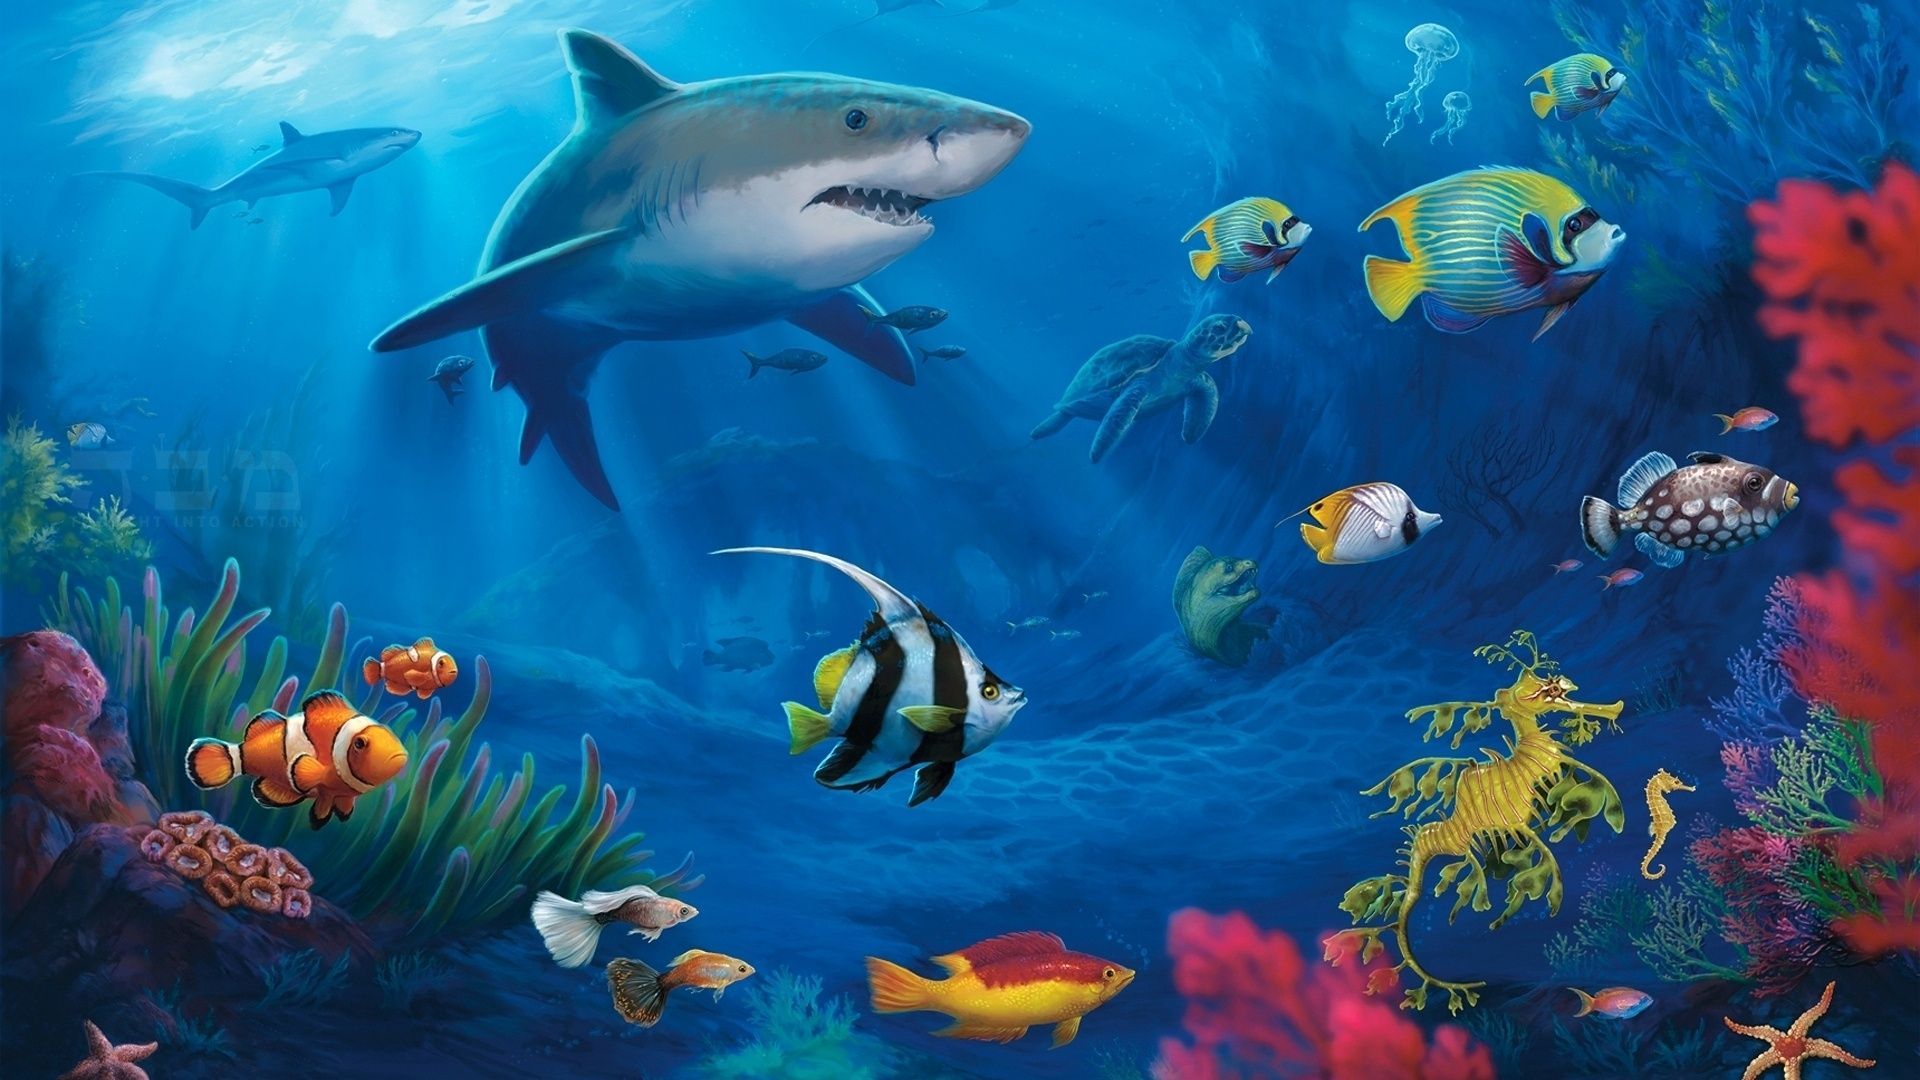 Live Background For PC Free Download. Fish wallpaper, Live